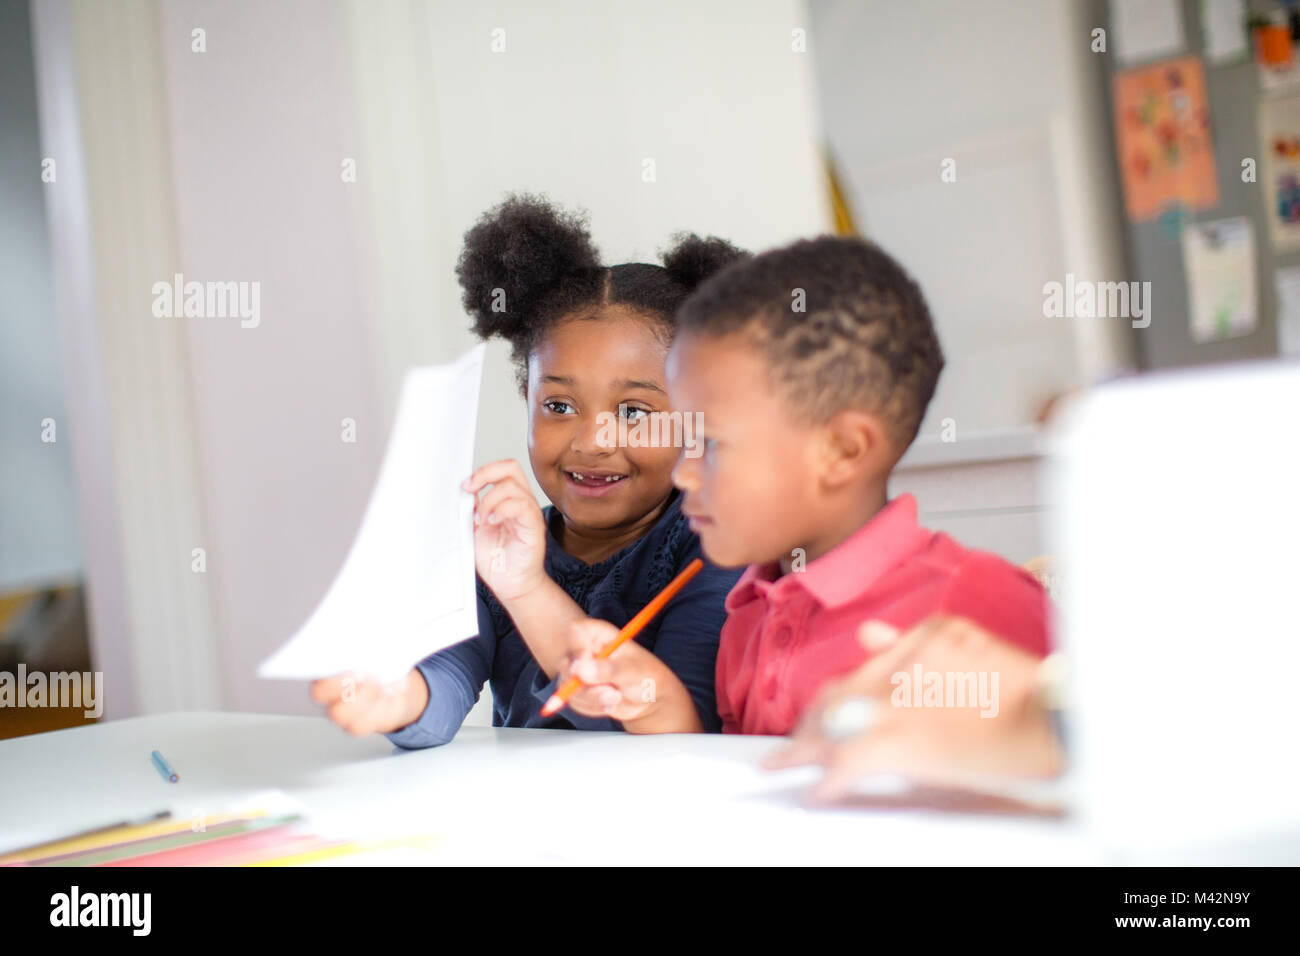 African American holding up school work proudly Stock Photo